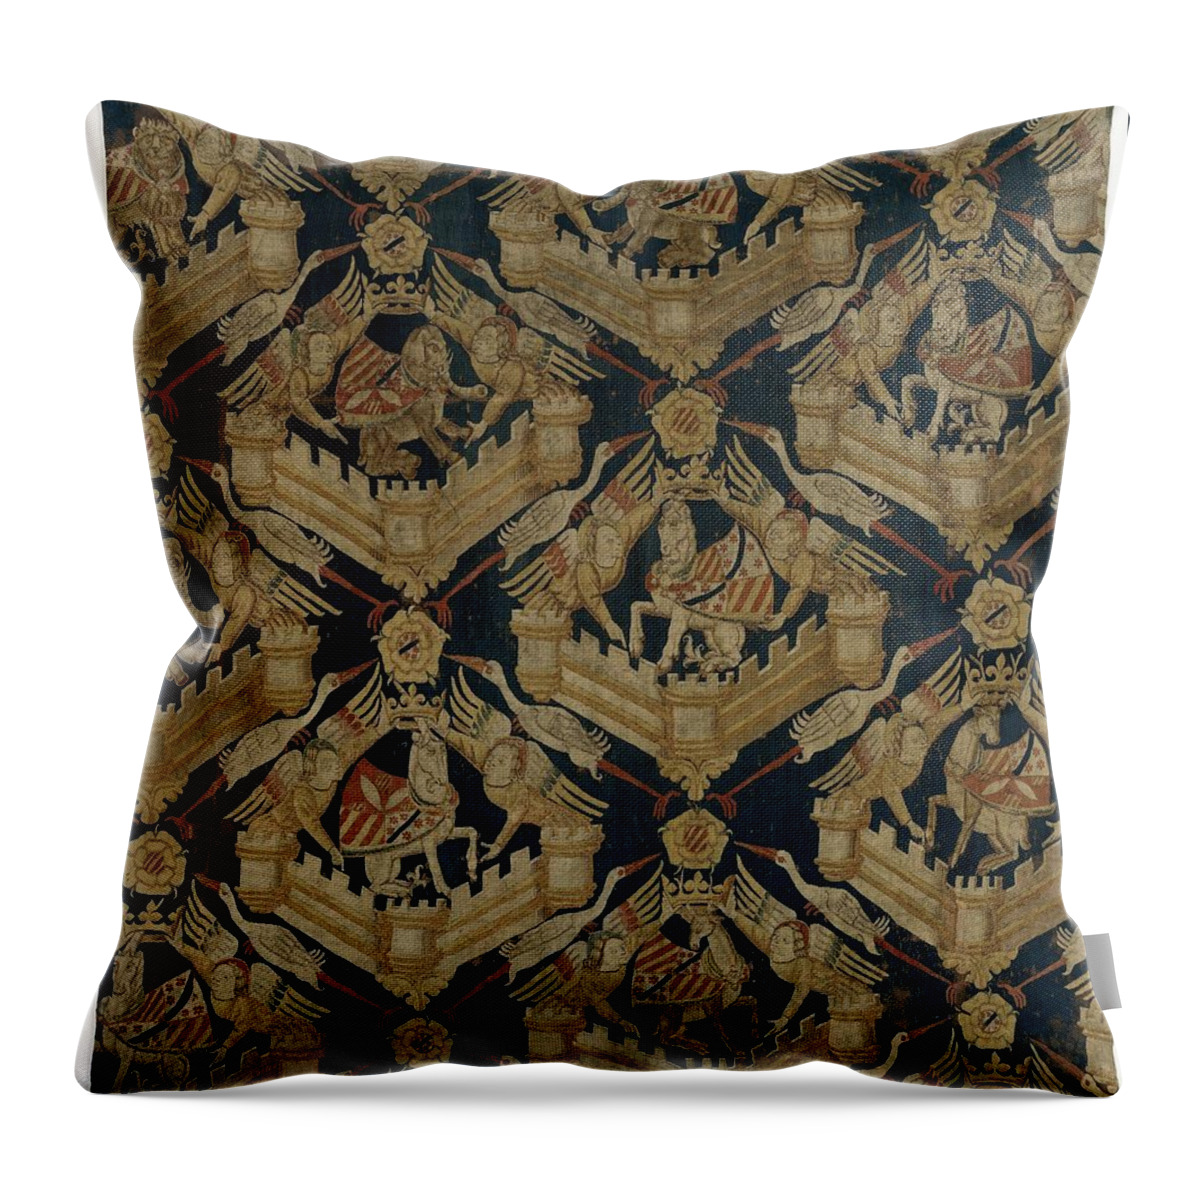 Carpet With The Arms Of Rogier De Beaufort Throw Pillow featuring the tapestry - textile Textile tapestry Carpet with the arms of Rogier de Beaufort by Vintage Collectables